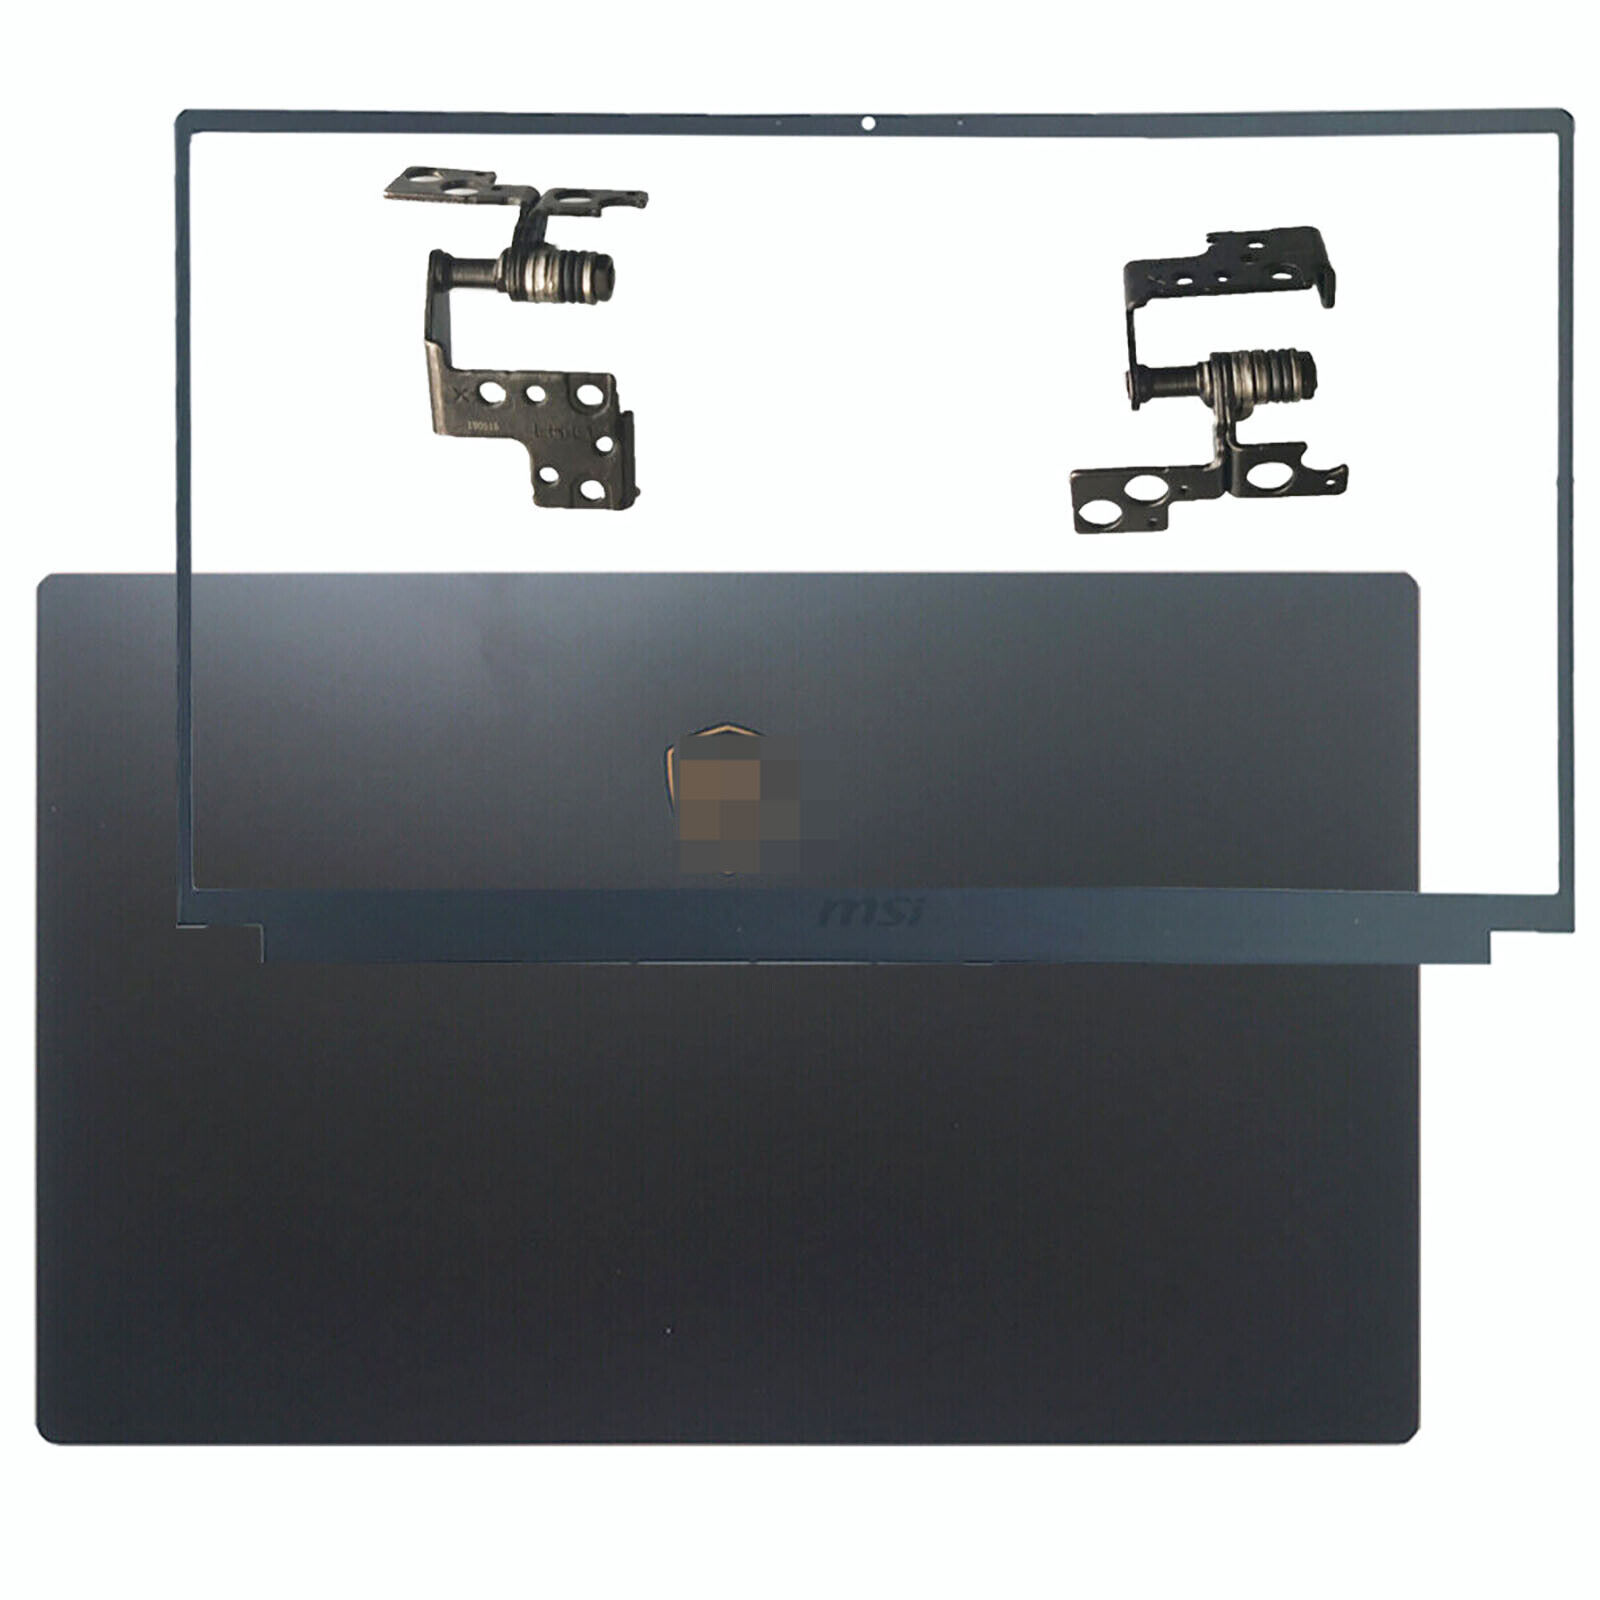 NEW LCD Back Cover+Bezel+Hinges For MSI GS75 STEALTH MS-17G1 3077G1A212